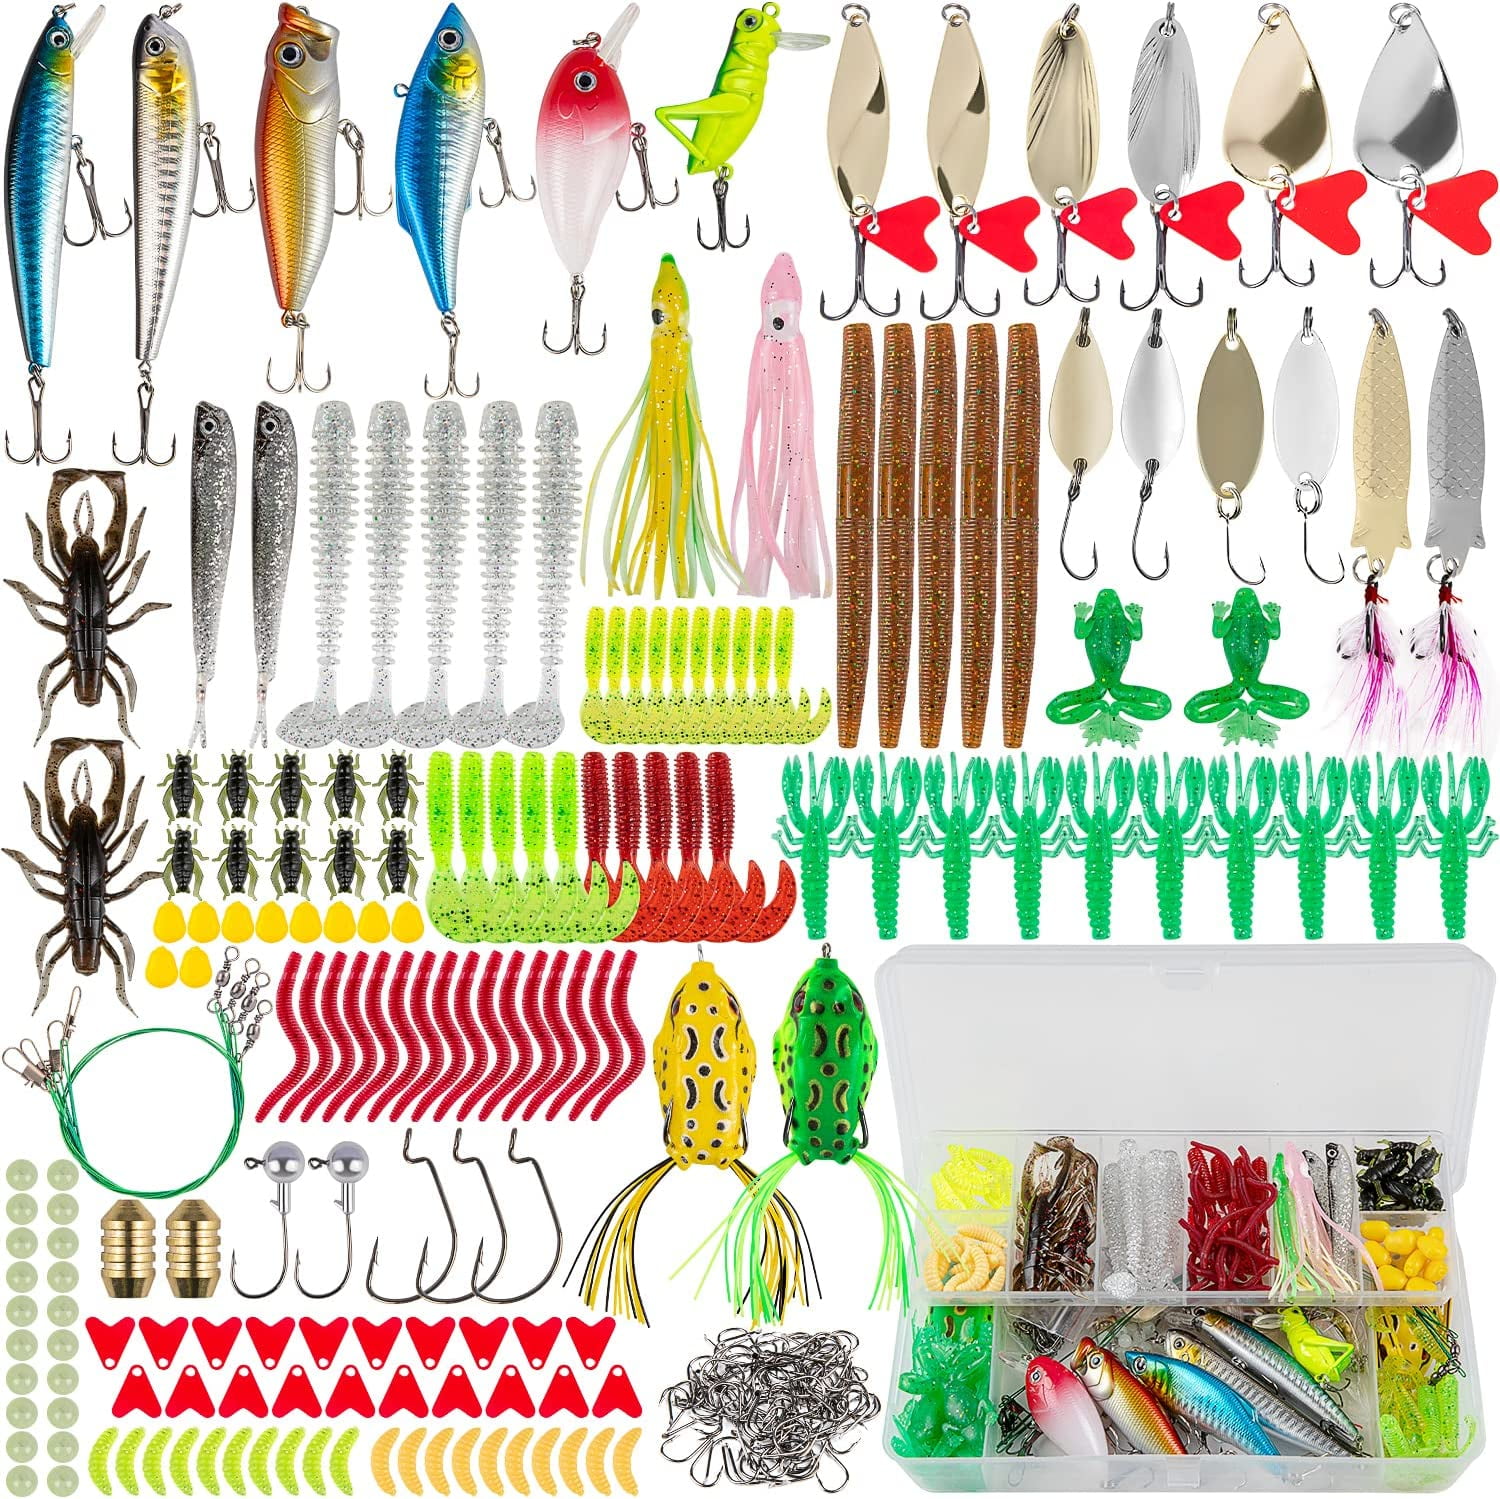 GOANDO Fishing Lures 380Pcs Fishing Gear for Bass Trout Salmon Fishing Kit  Tackle Box with Plugs Jigs Crankbaits Spoon Poppers Soft Plastics Worms and